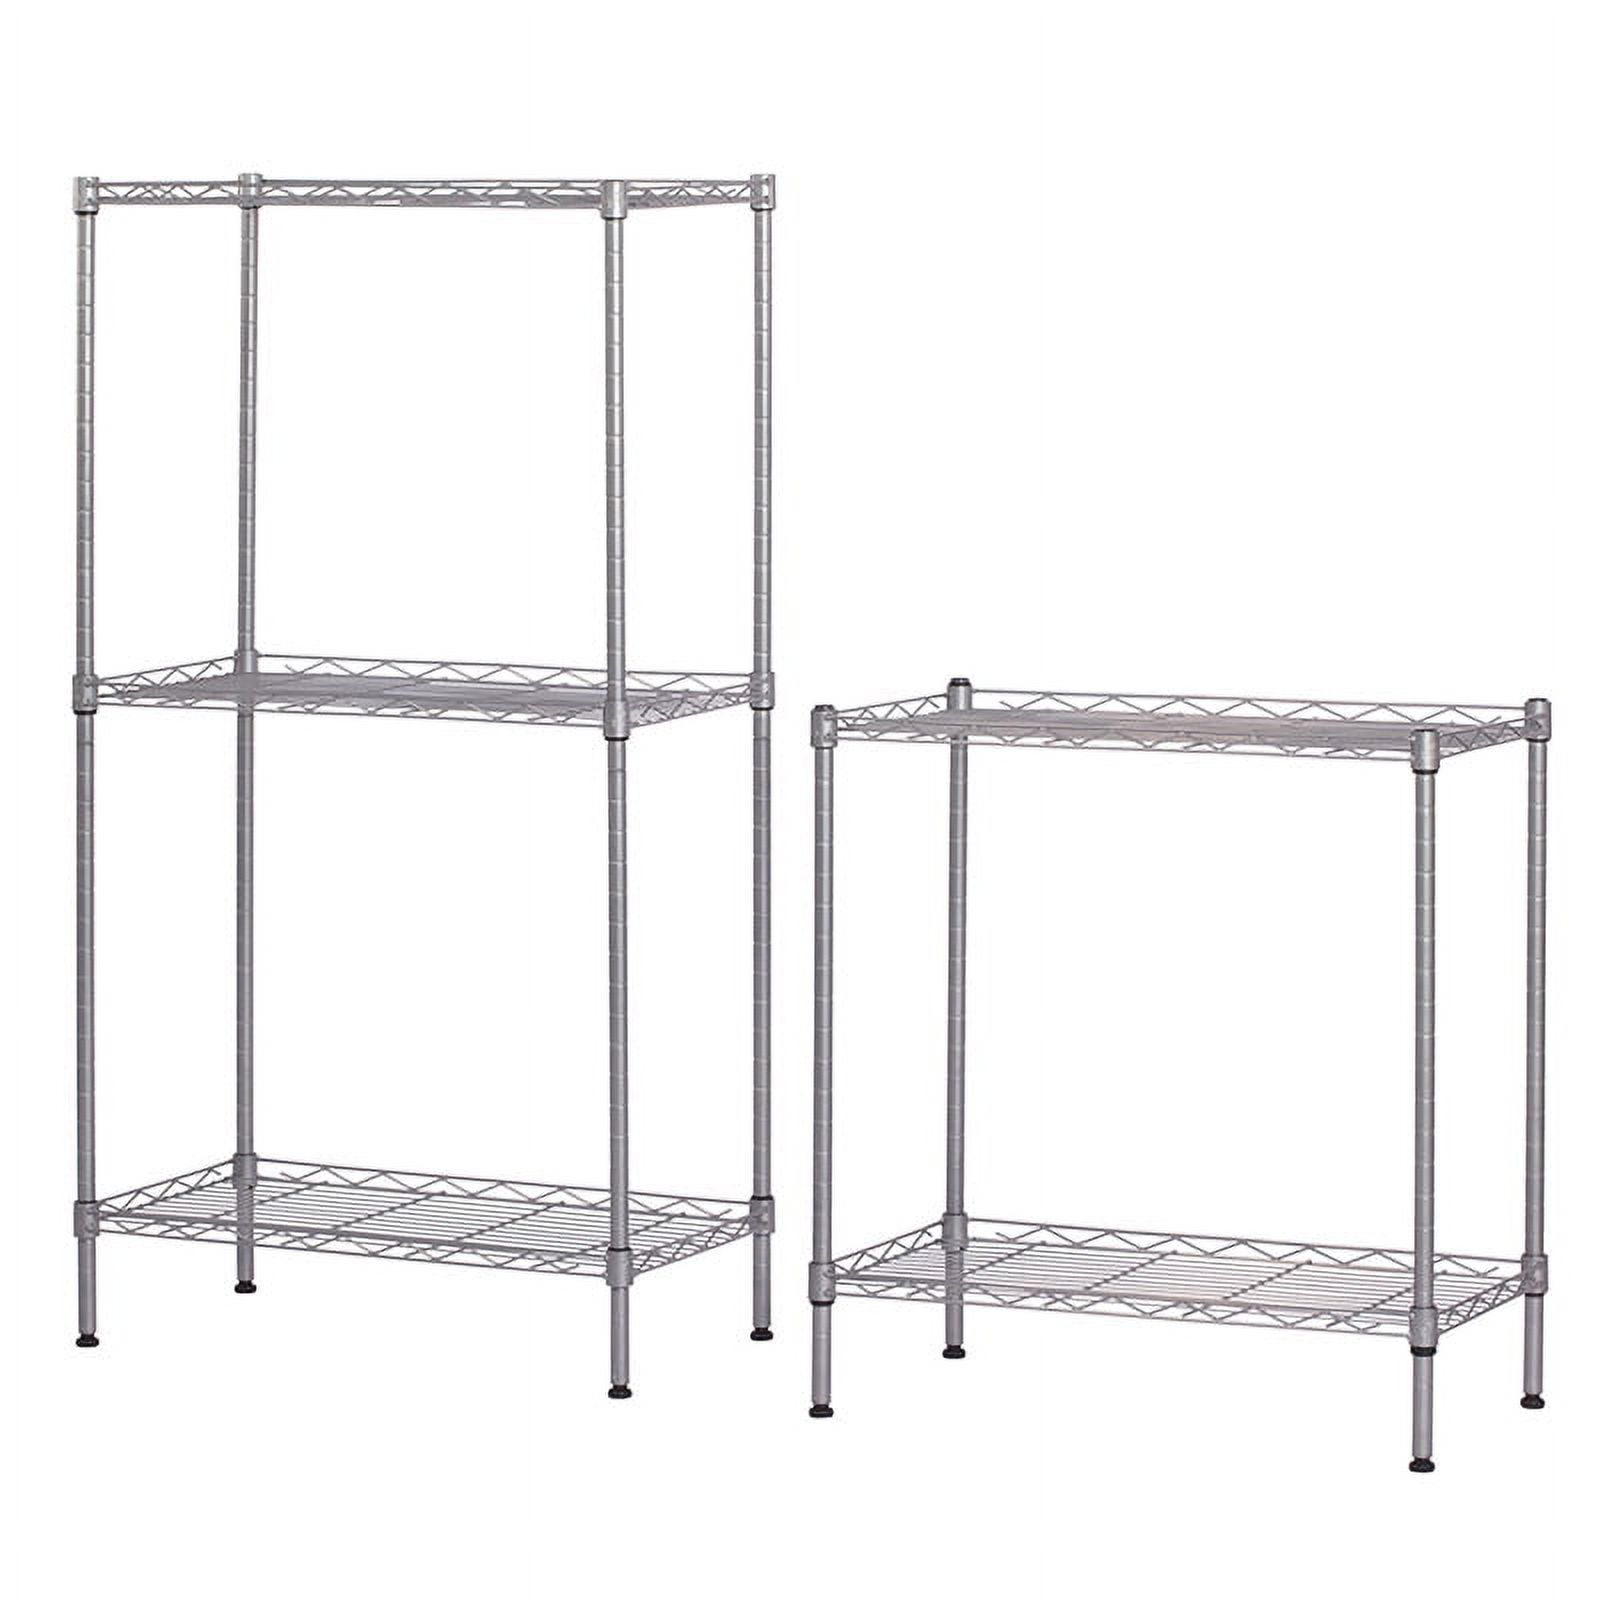 5 Tier Storage Shelves Wire Storage Shelves, Metal Shelves for Garage Metal Storage Shelving, Pantry Shelves Kitchen Rack Shelving Units and Storage, 21.25" x 11.42" x 59.06", Silver, S10146 - image 2 of 7